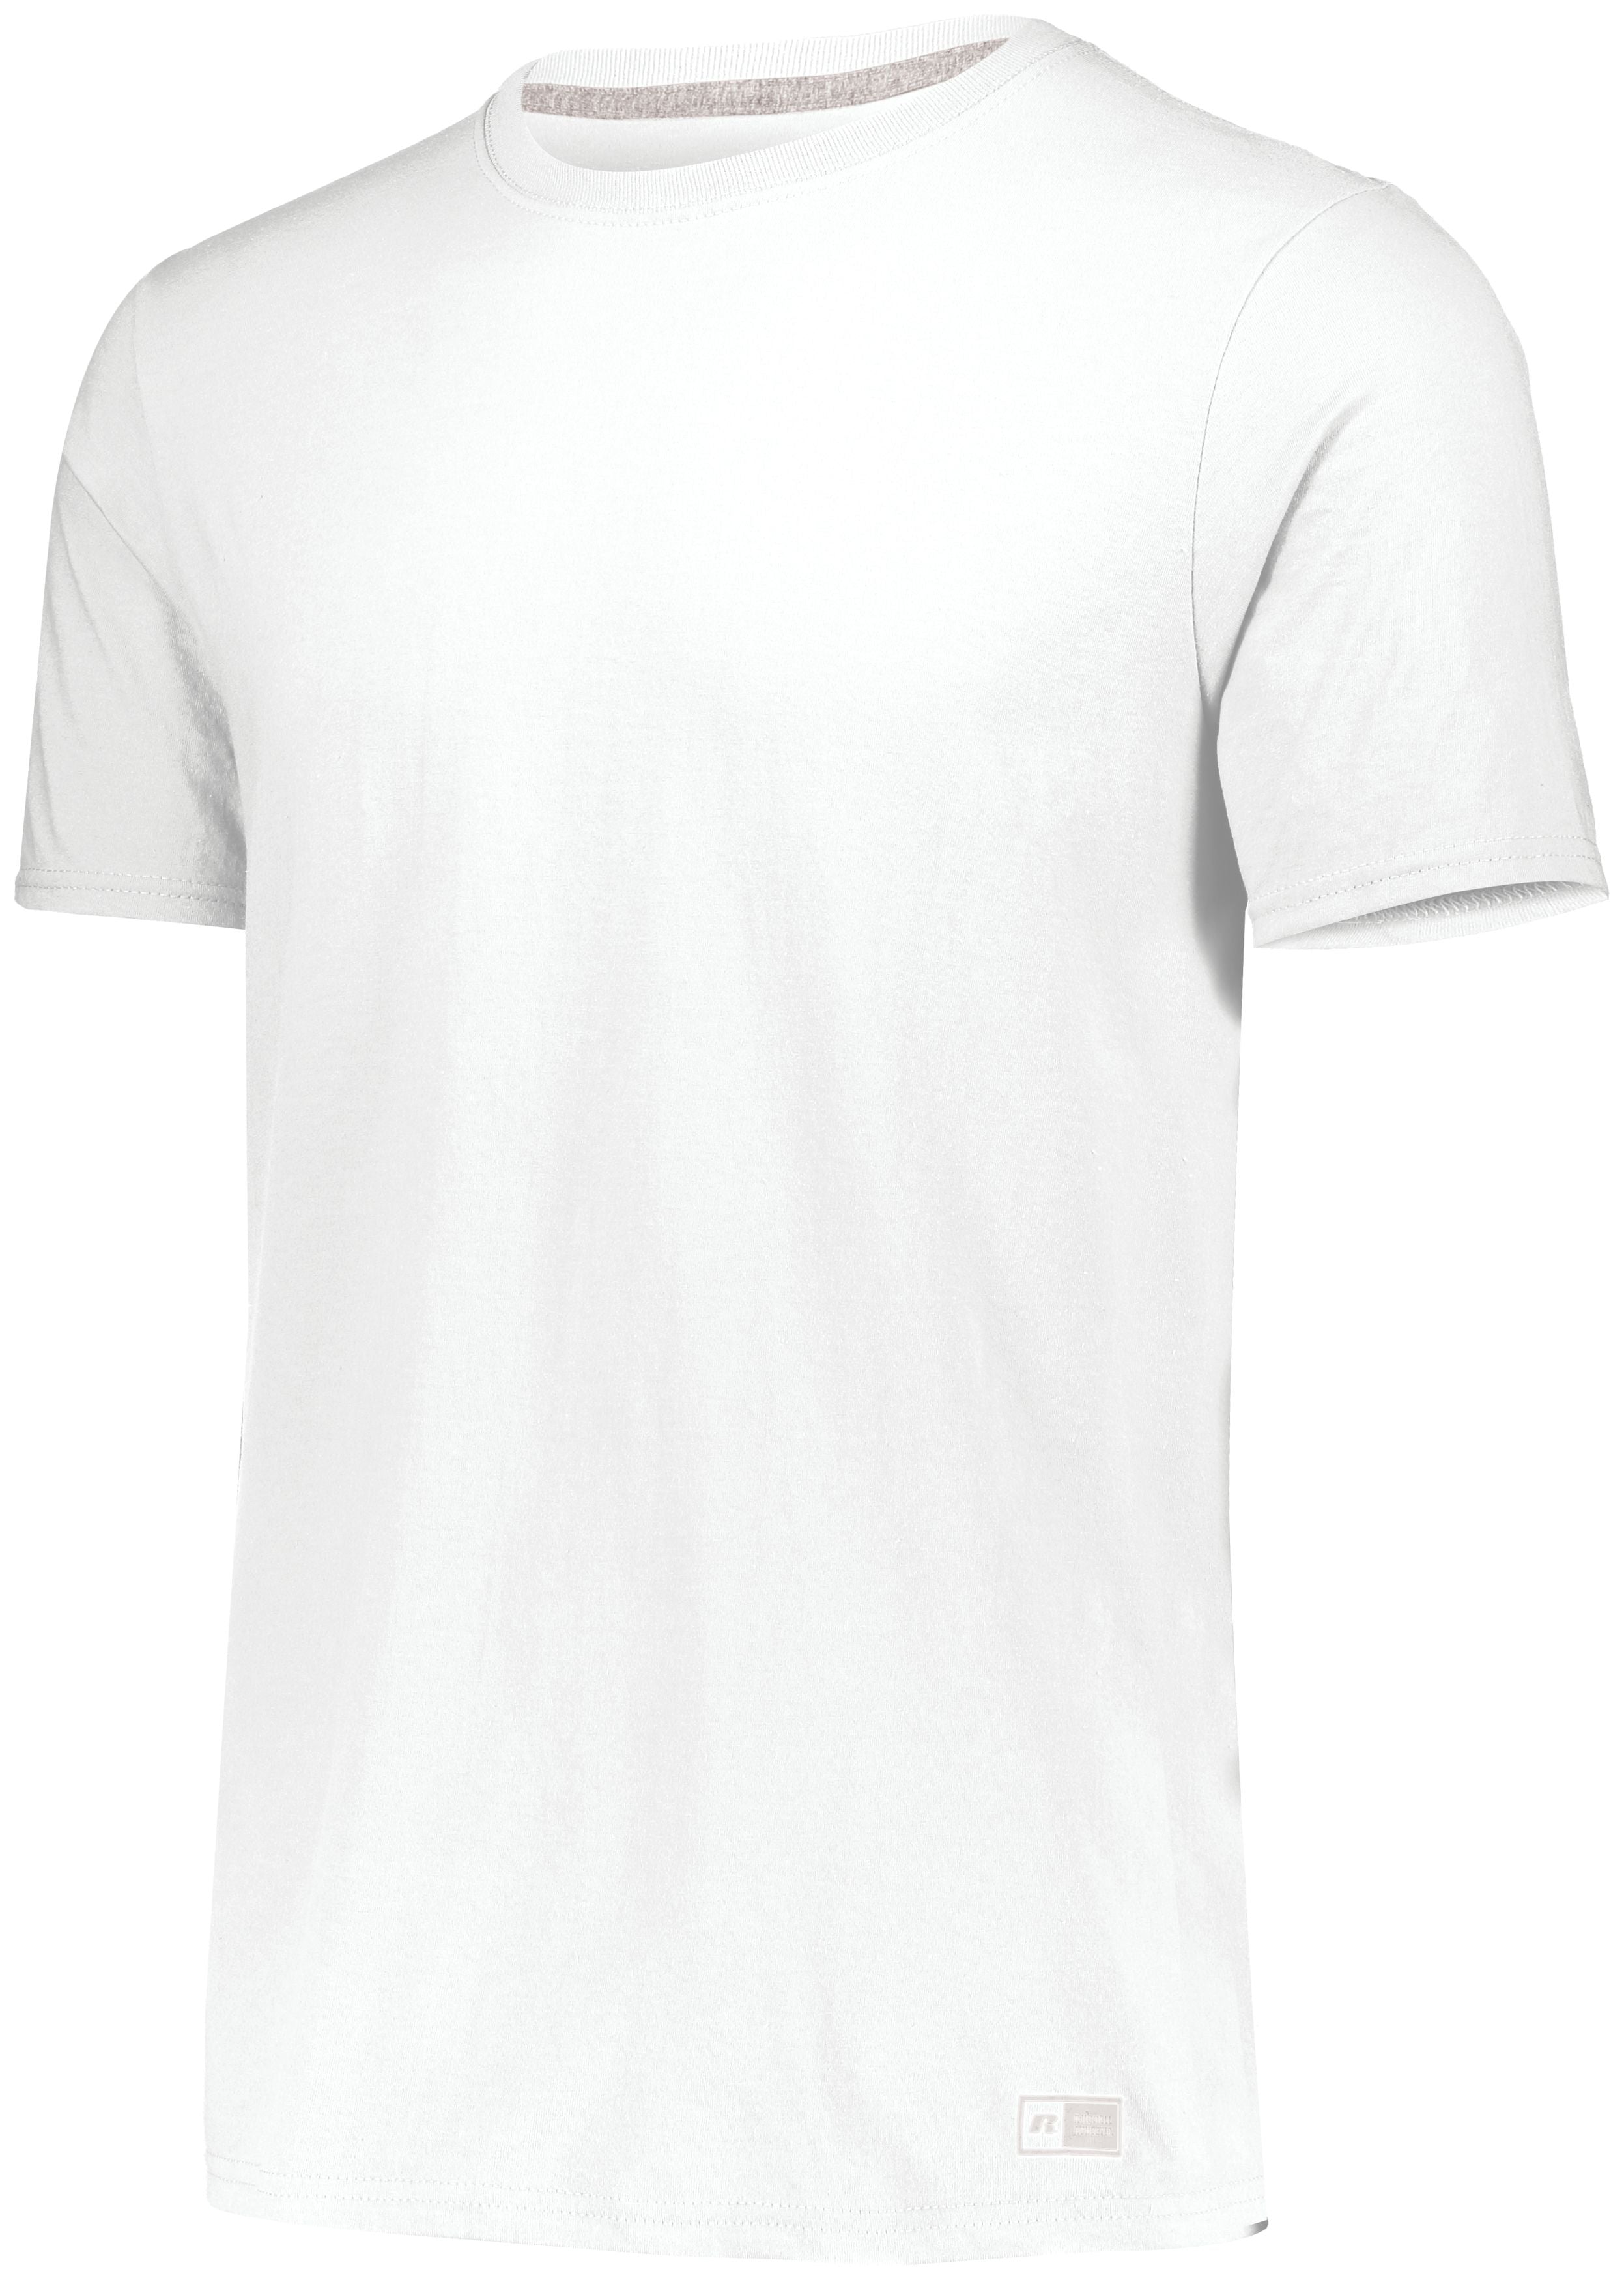 Russell Athletic Essential Tee